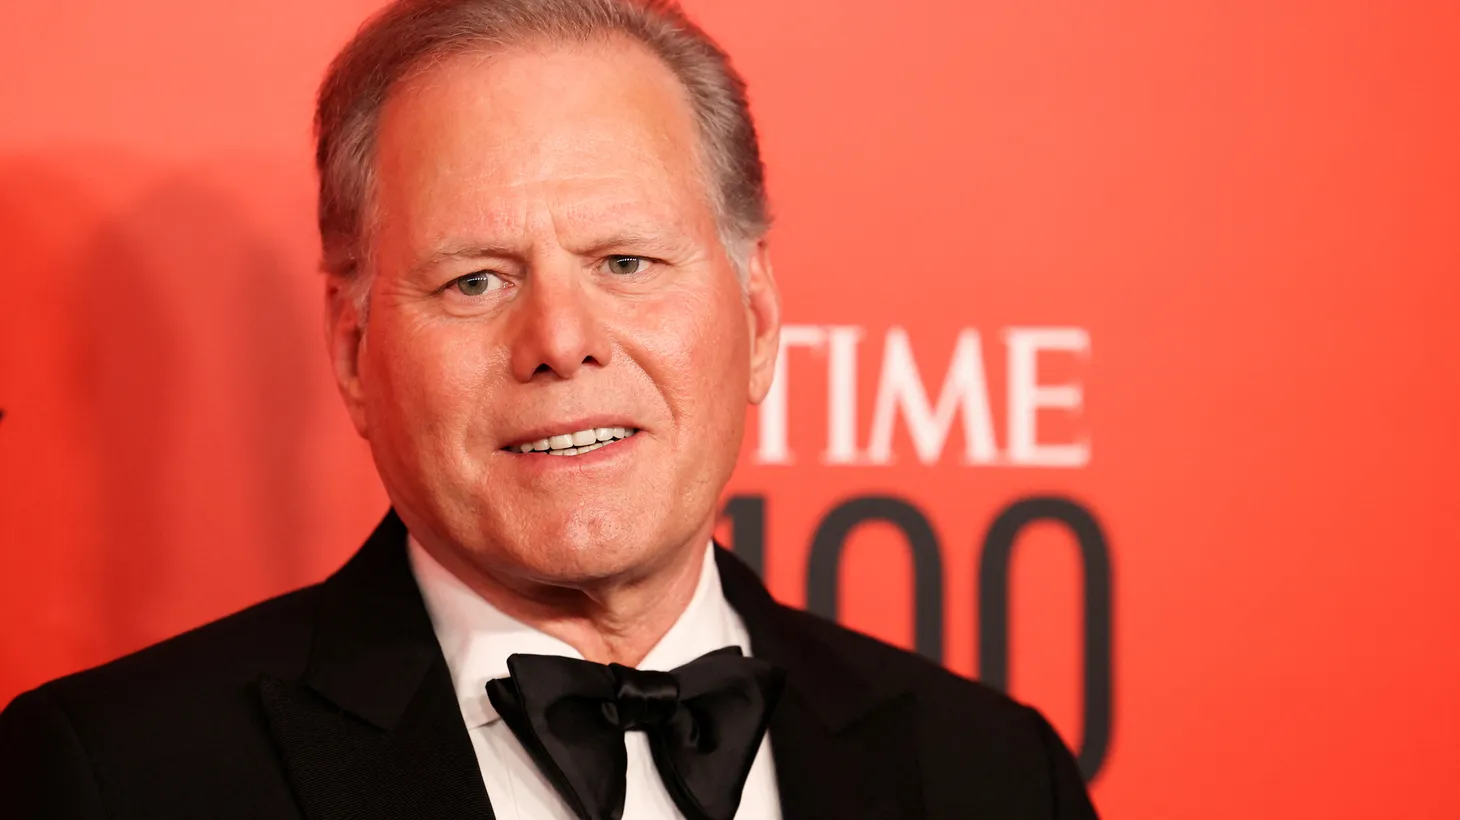 “[David Zaslav] has no win at DC when he's claiming that he has this plan, but he doesn't have a Kevin Feige, who is running Marvel to execute whatever the plan is or isn't, and it's unclear,” says Kim Masters. Warner Bros. Discovery head David Zaslav